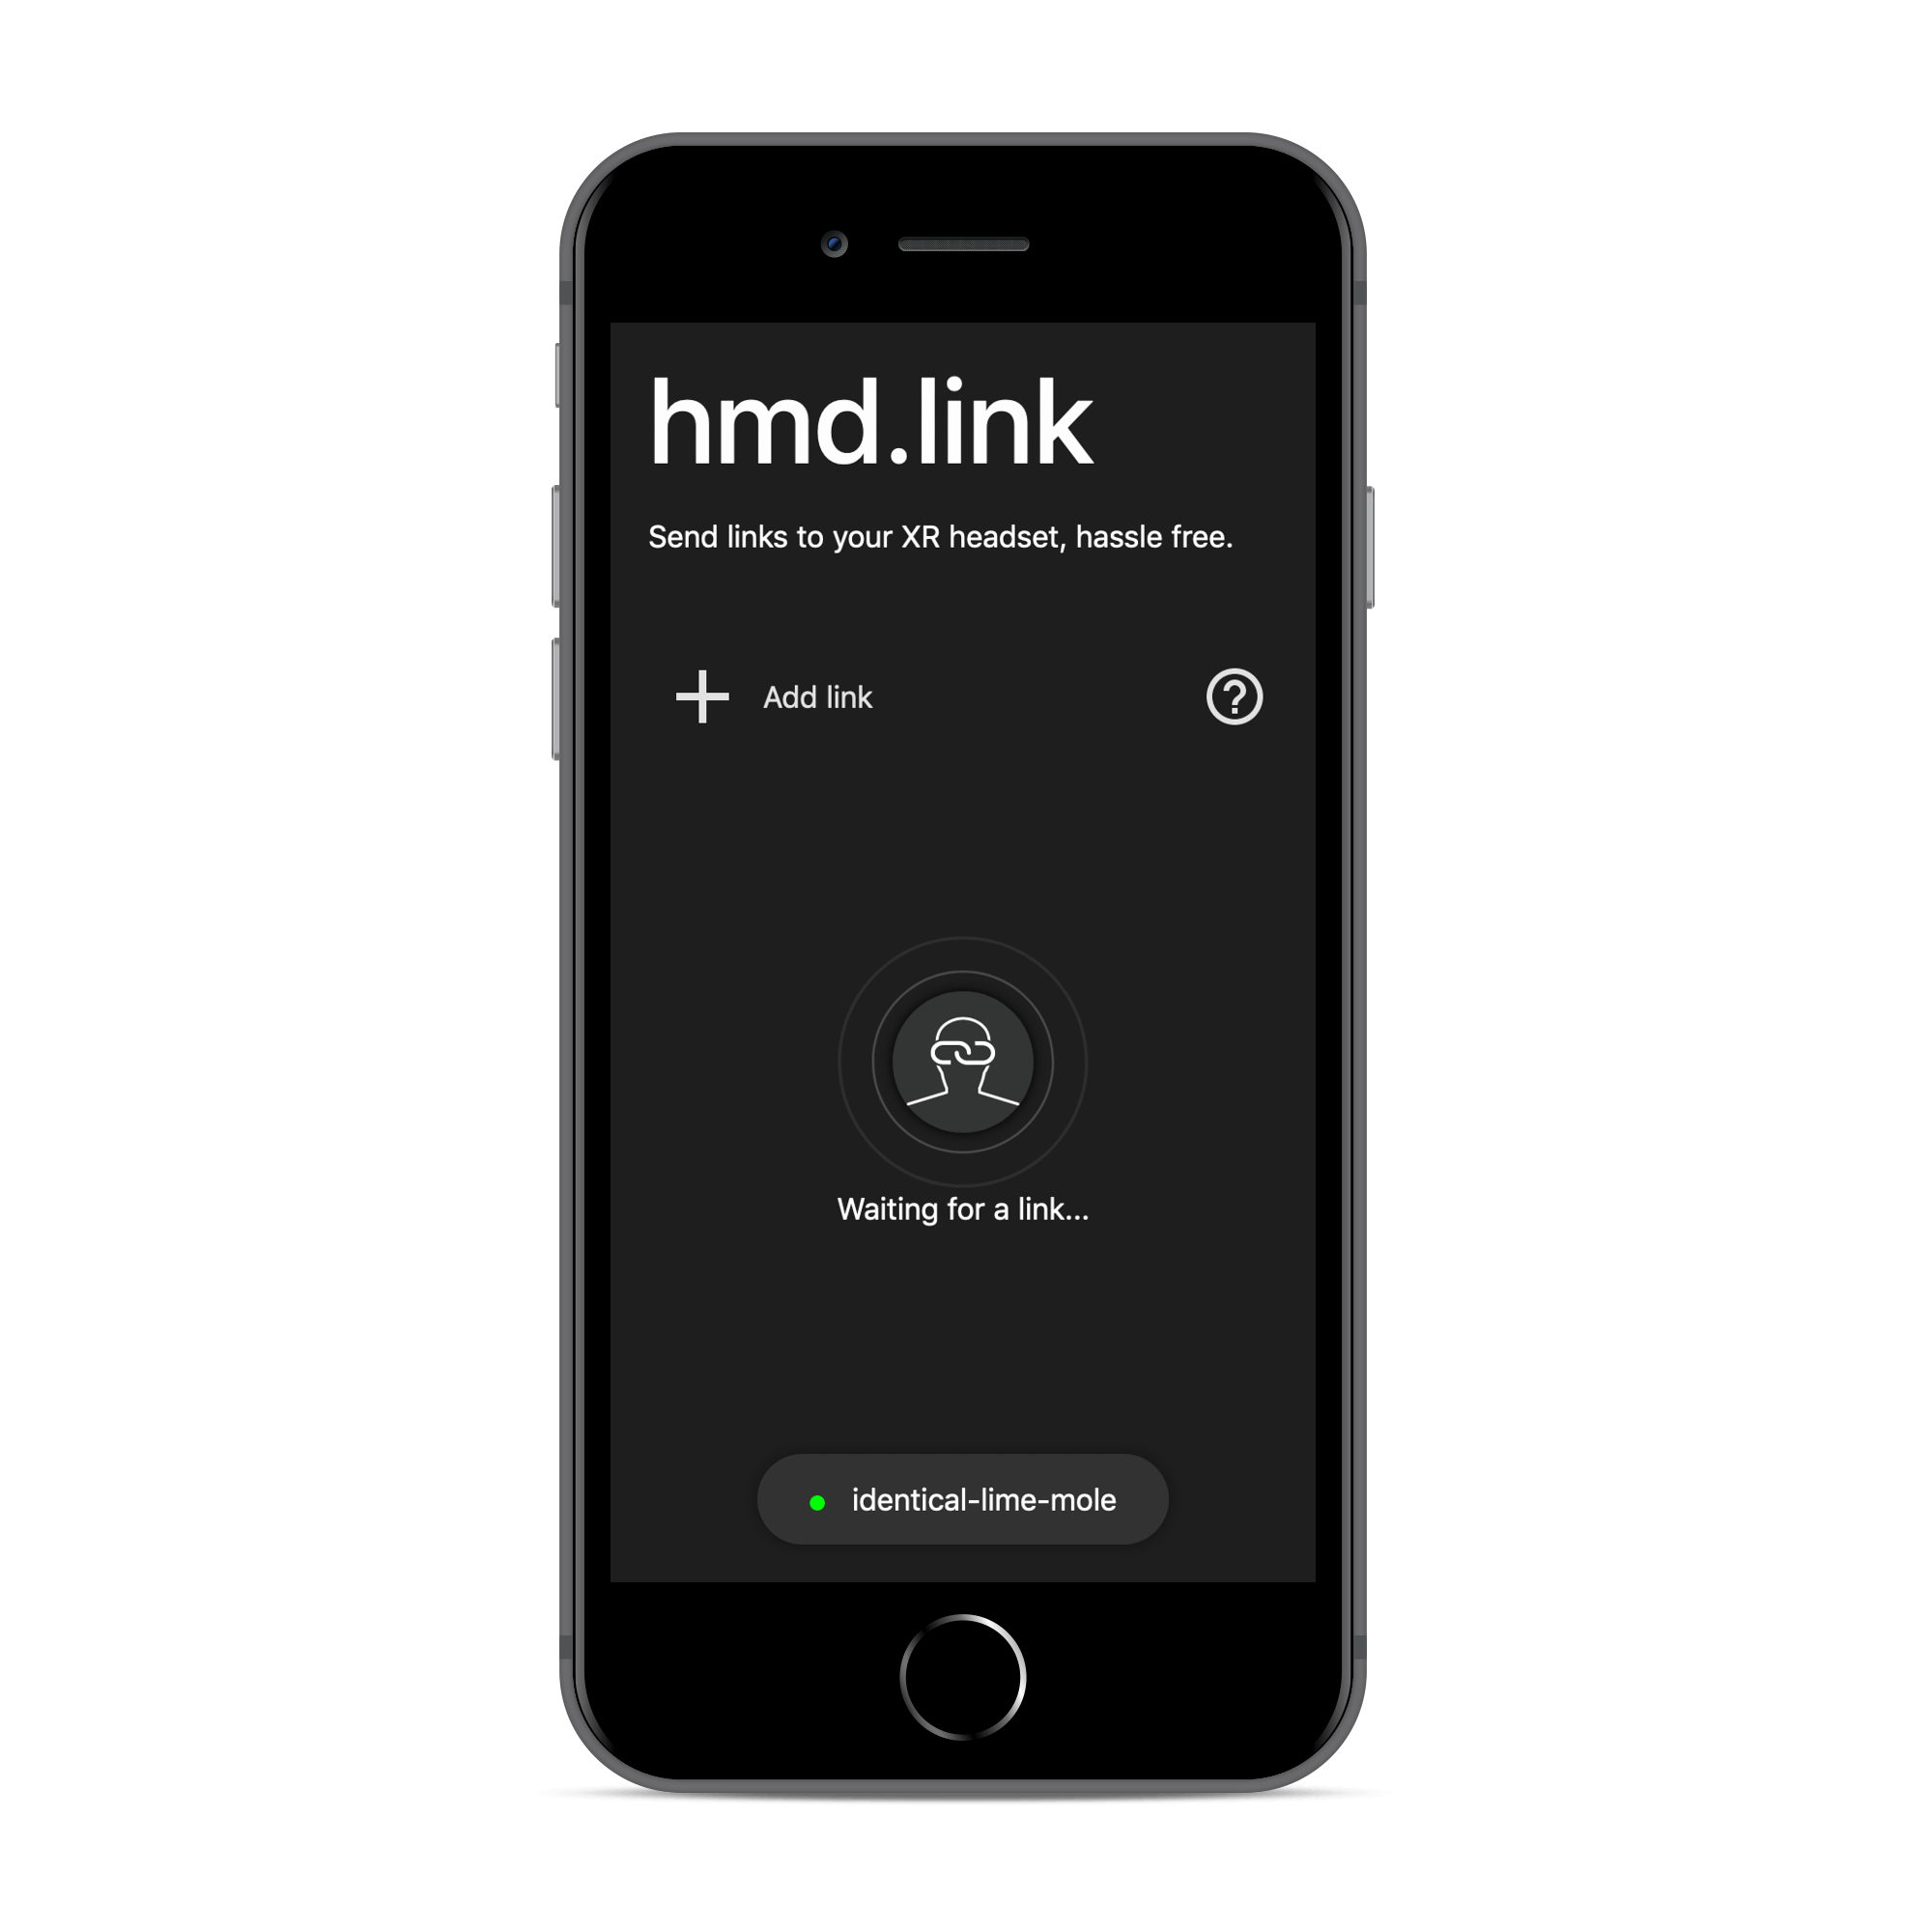 iPhone showing the hmd.link website